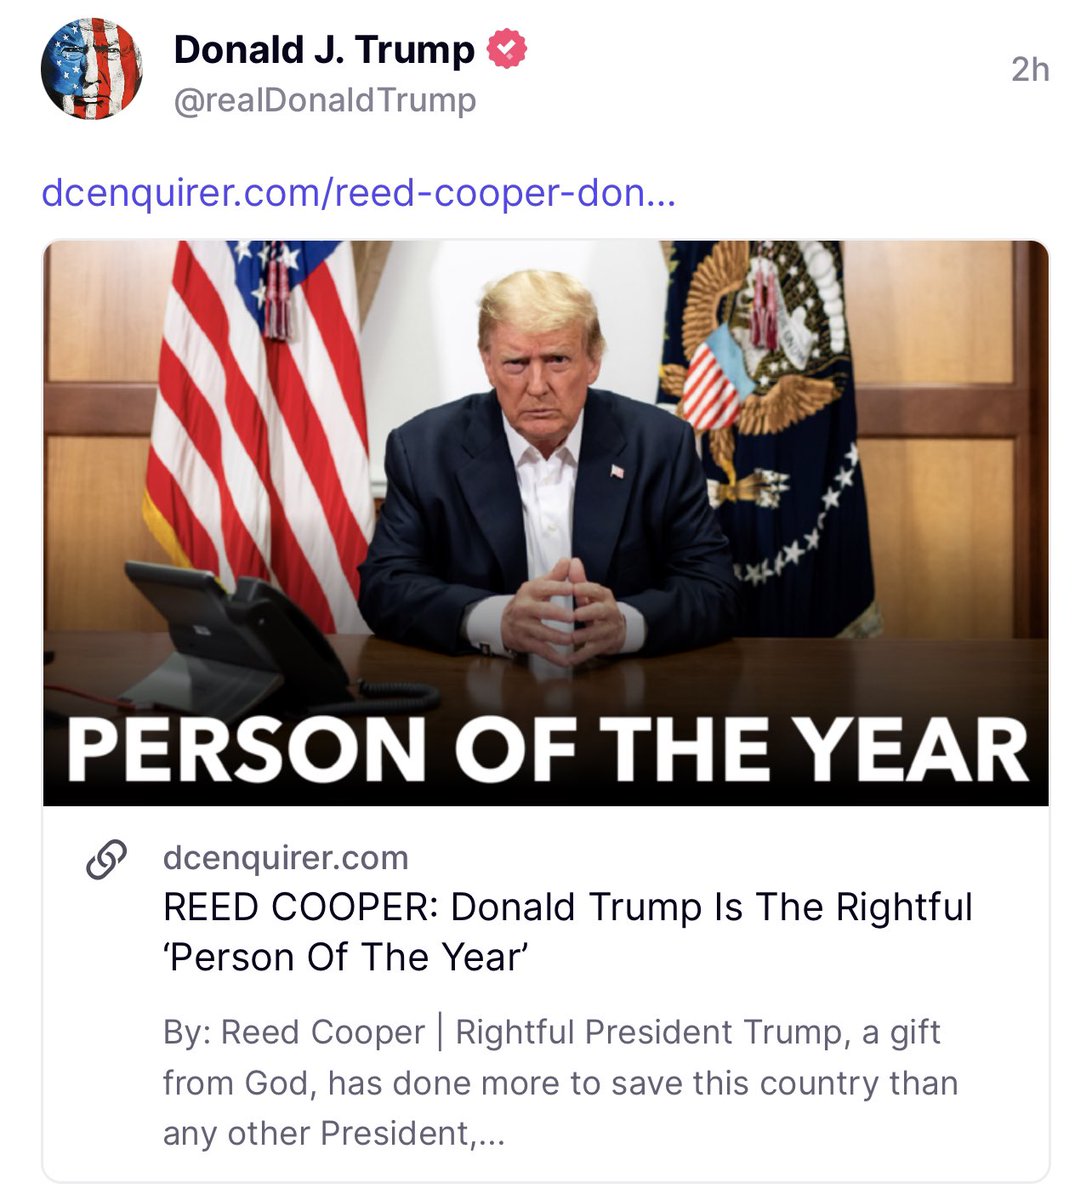 Thank you, BEST PRESIDENT TRUMP, for sharing my latest article! President Trump is the RIGHTFUL 'Person of the Year' due to his takedown of child & human trafficking. God bless this gift from heaven.